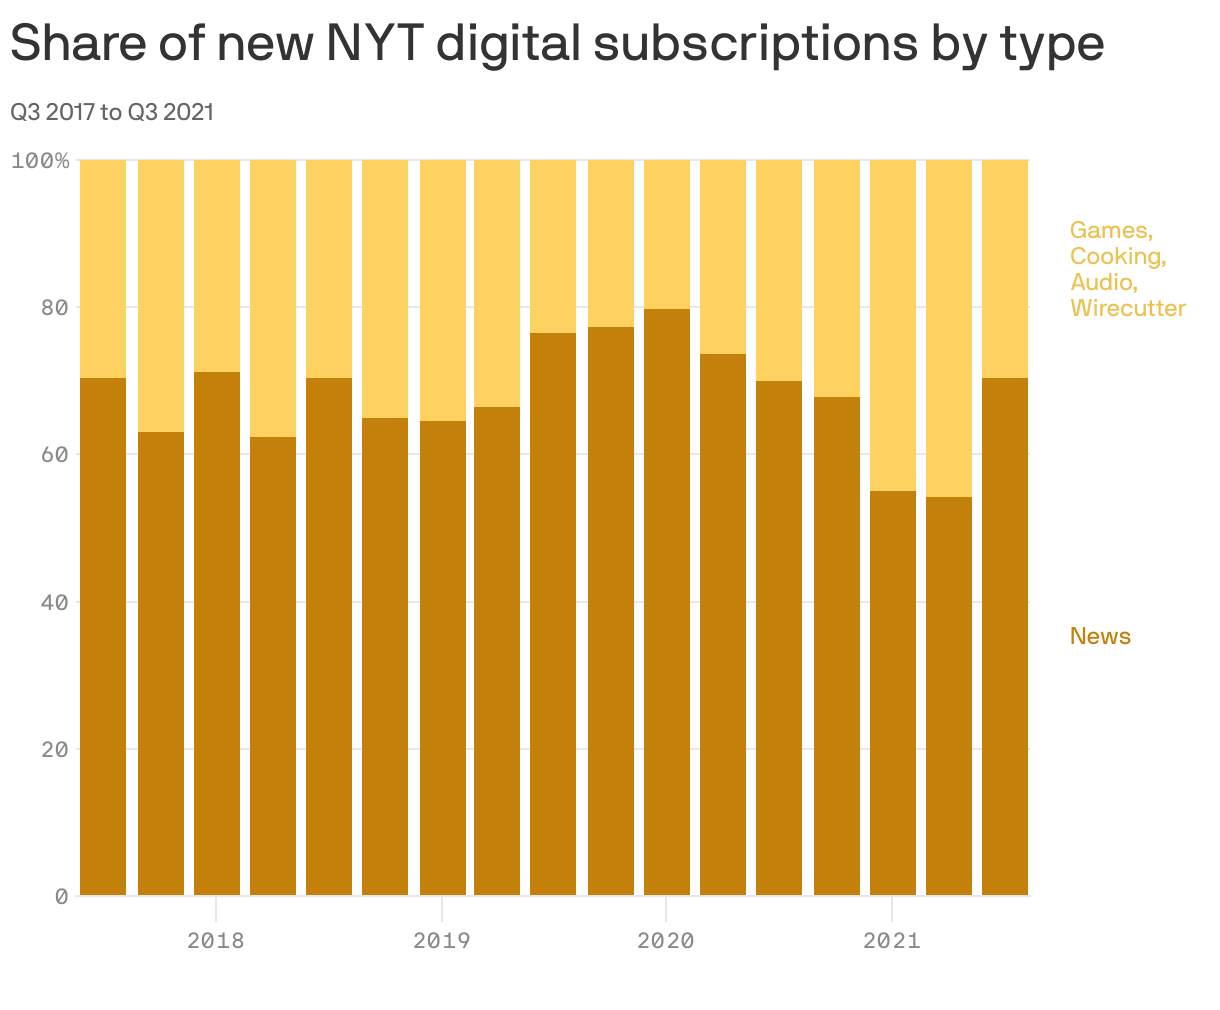 Share of new NYT digital subscriptions by type